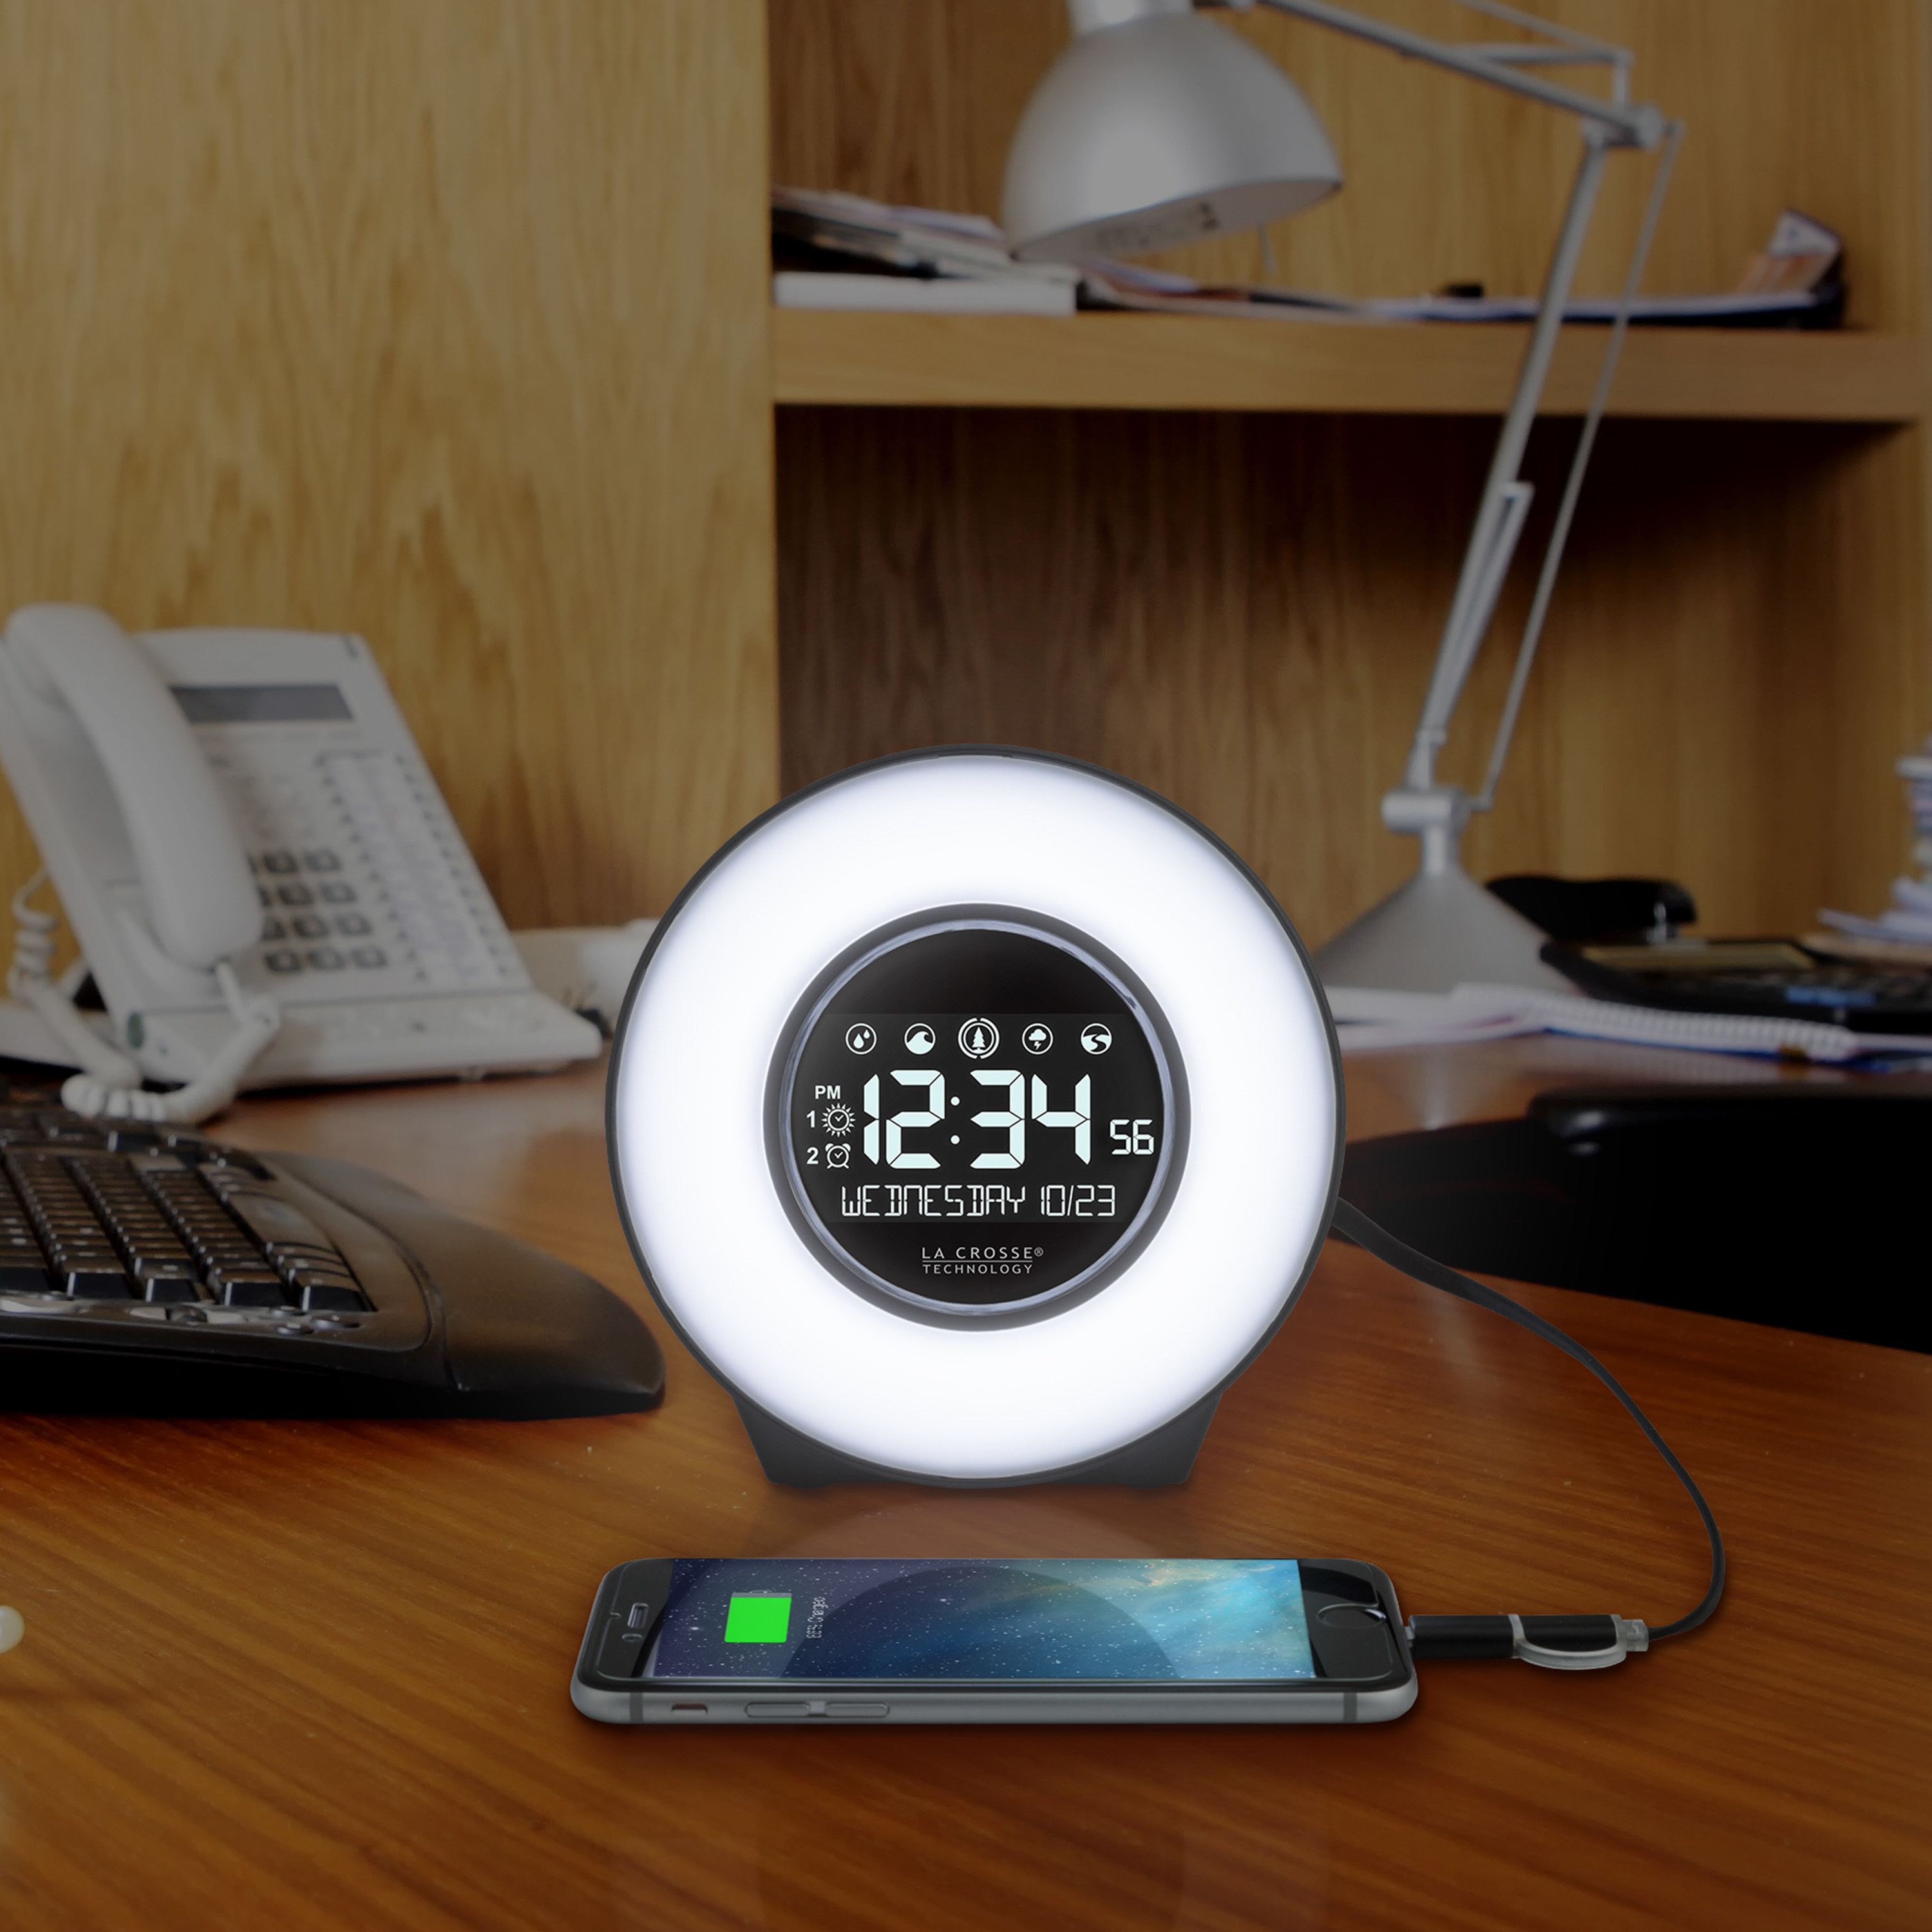 desk clock with white light glowing and a phone charging